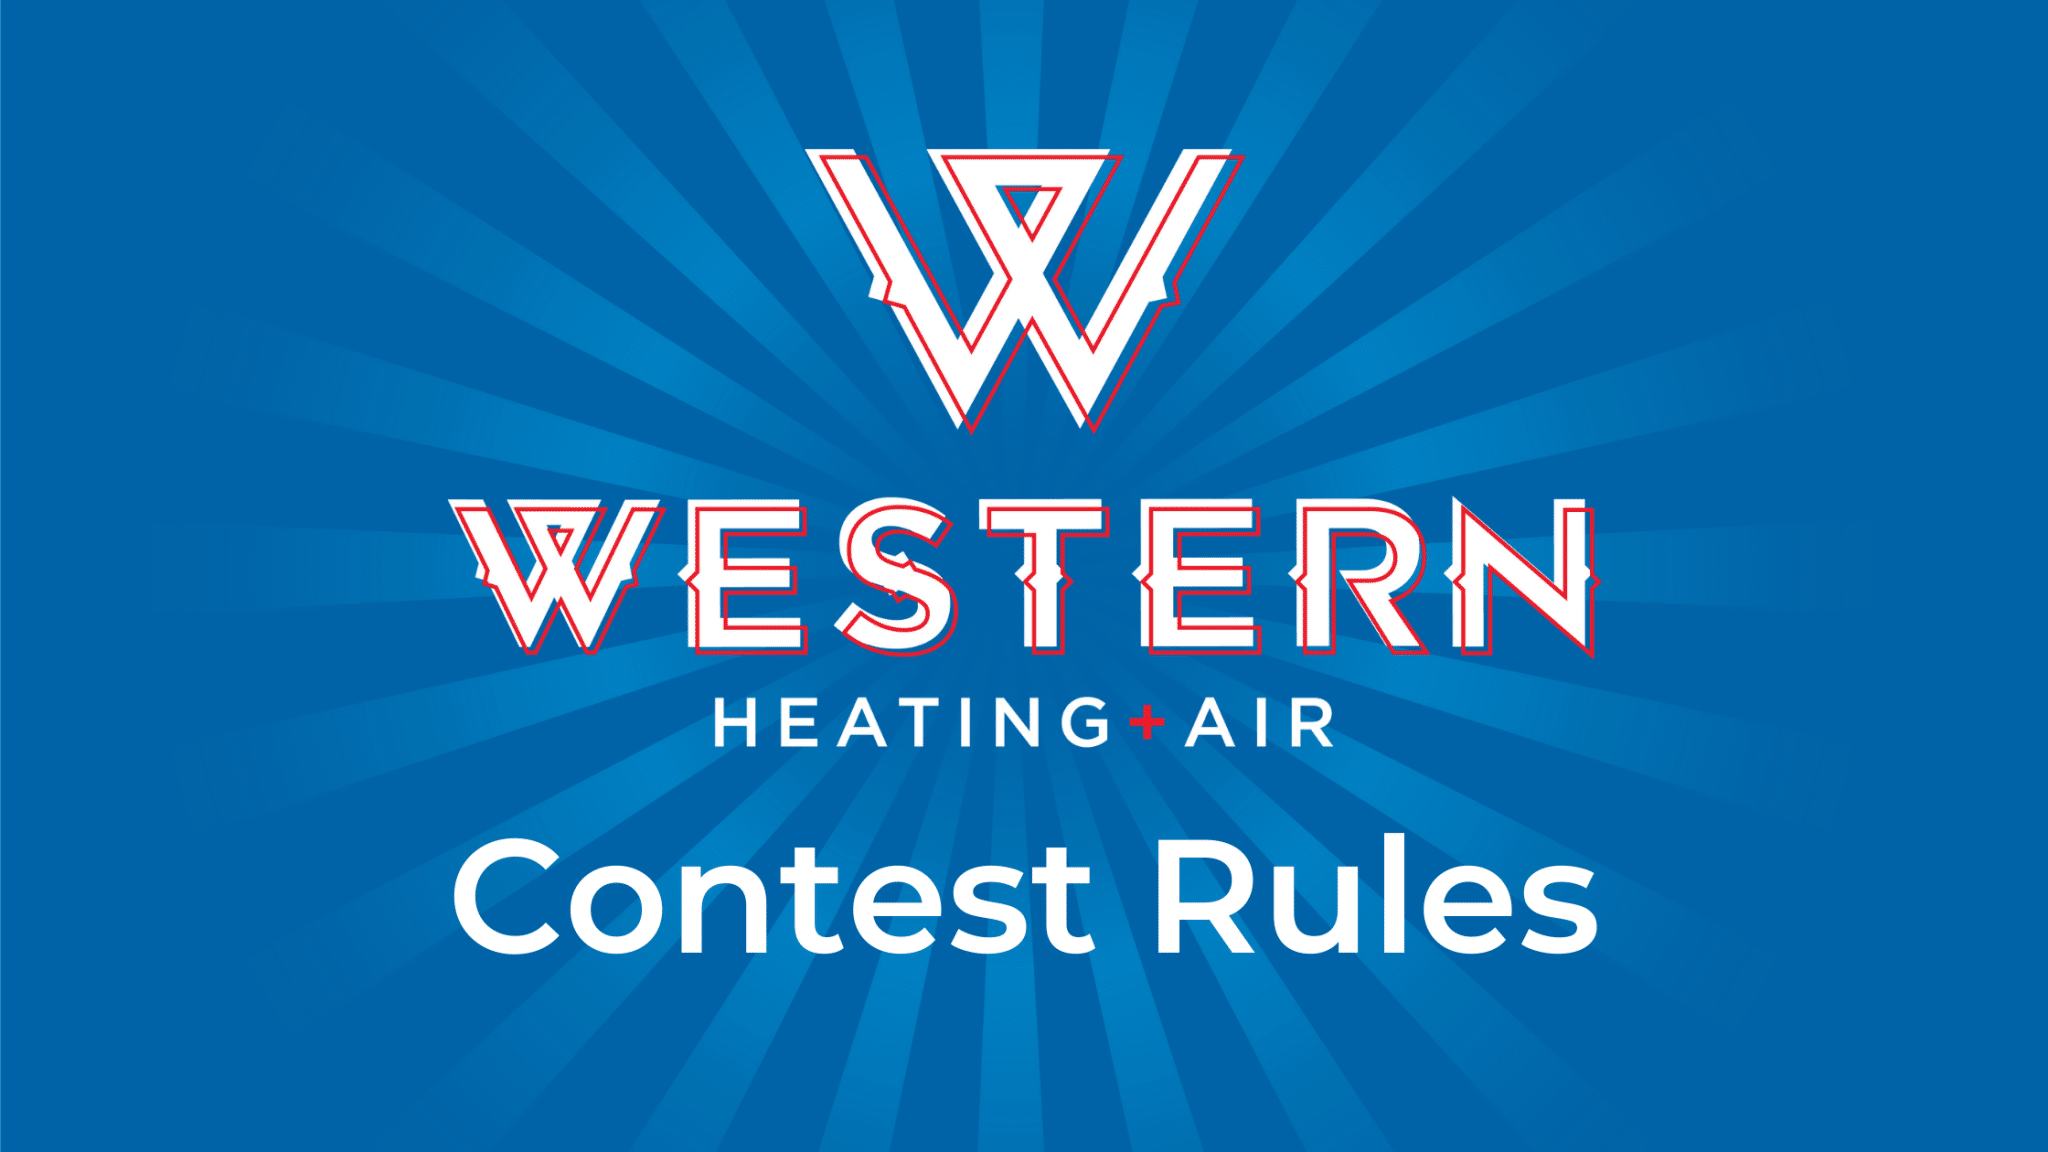 Western Heating and Air Conditioning Contest Rules - Western Heating and Air